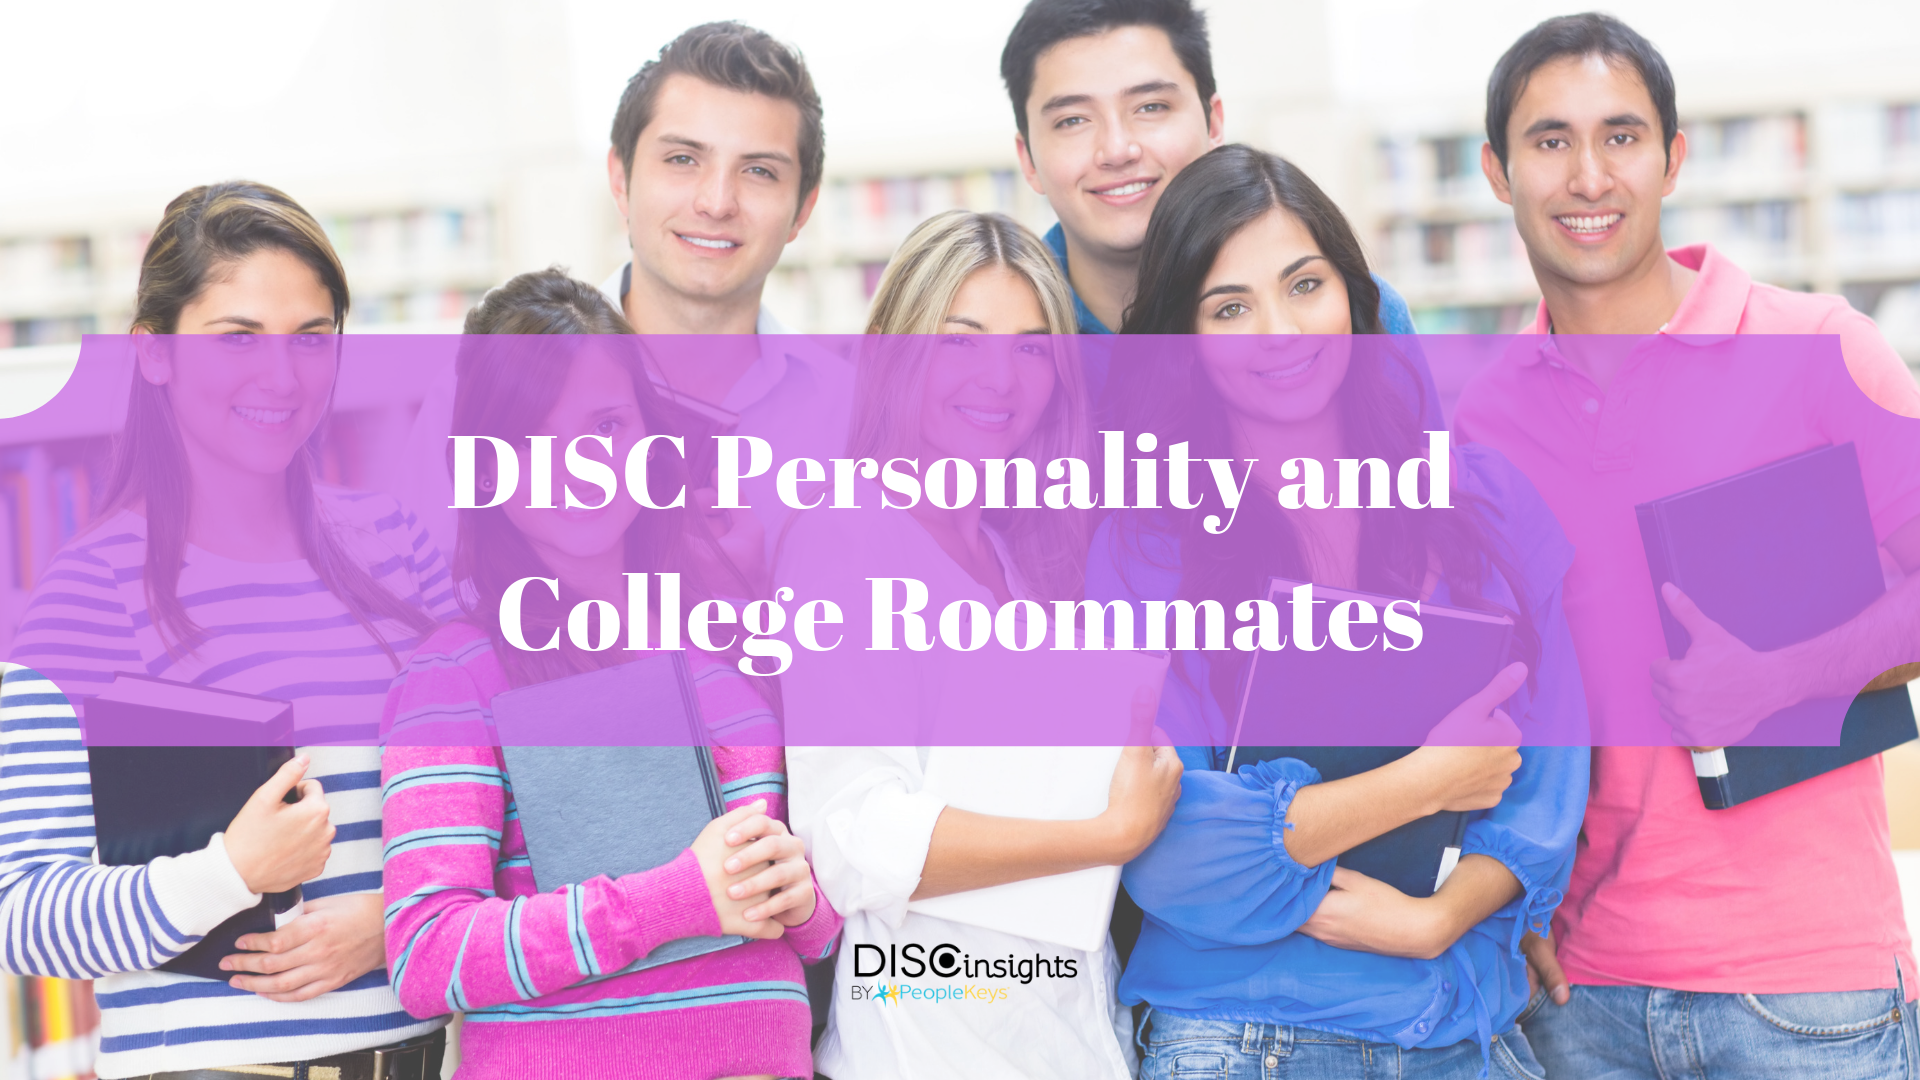 DISC Personality and College Roommates